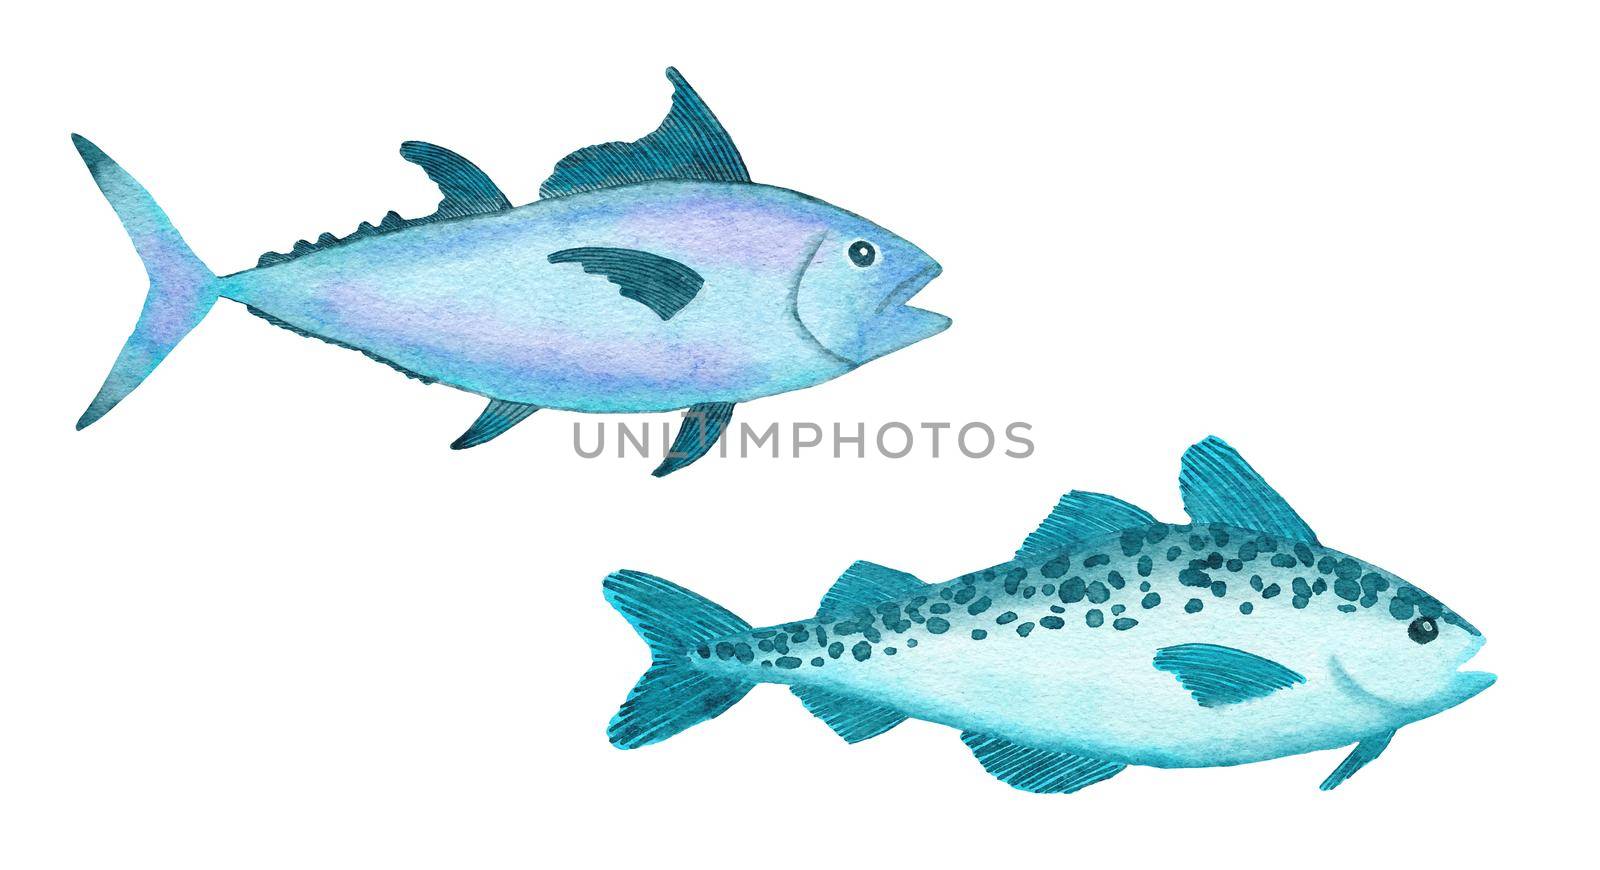 Watercolor illustration of tropical fish in blue turquoise purple colors, ocean sea underwater wildlife animals. Nautical summer beach design, coral reef life nature. by Lagmar